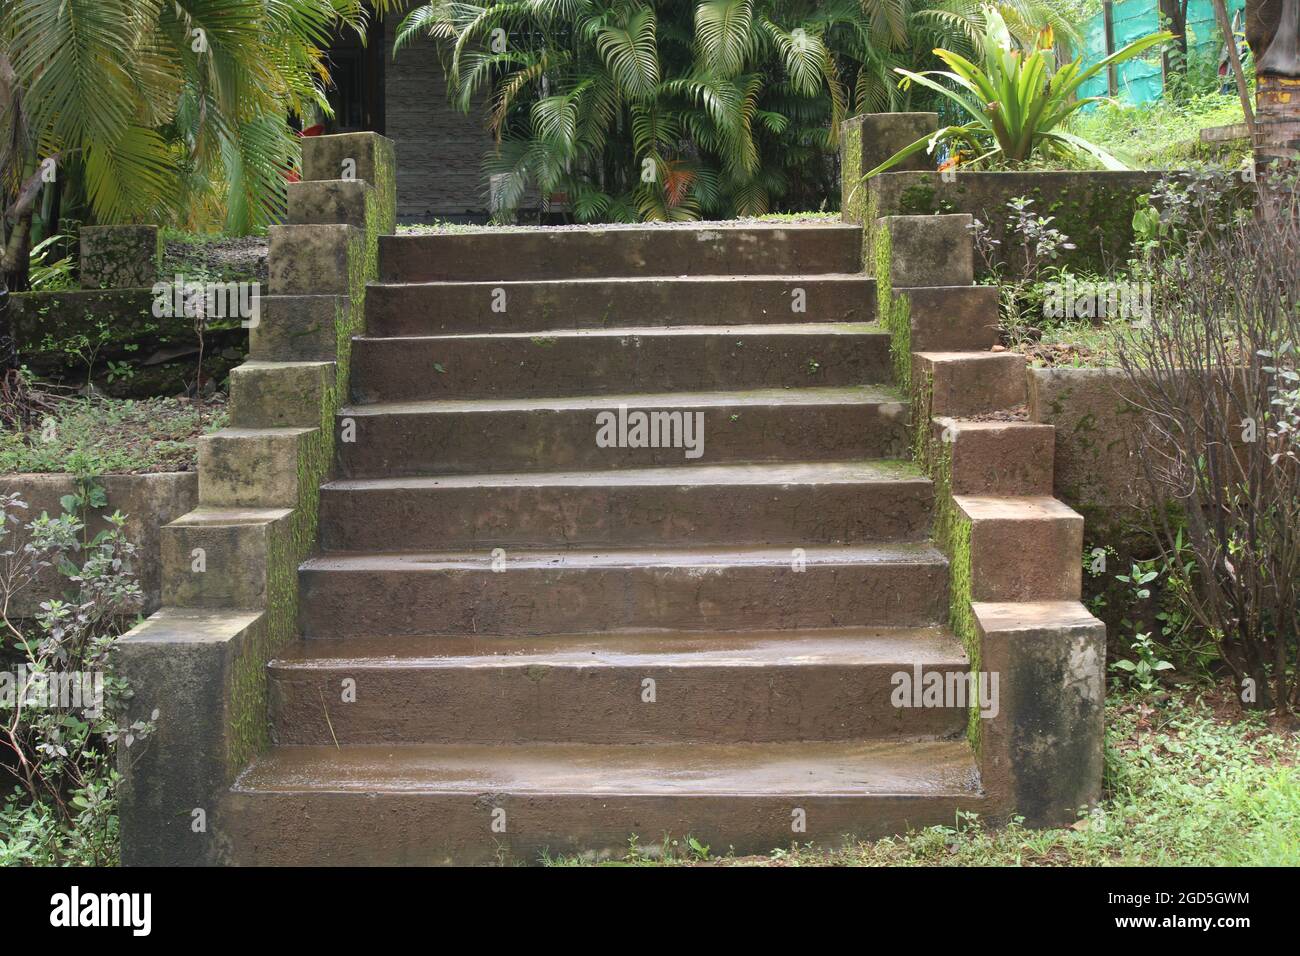 Stair case of cement with greenery Stock Photo